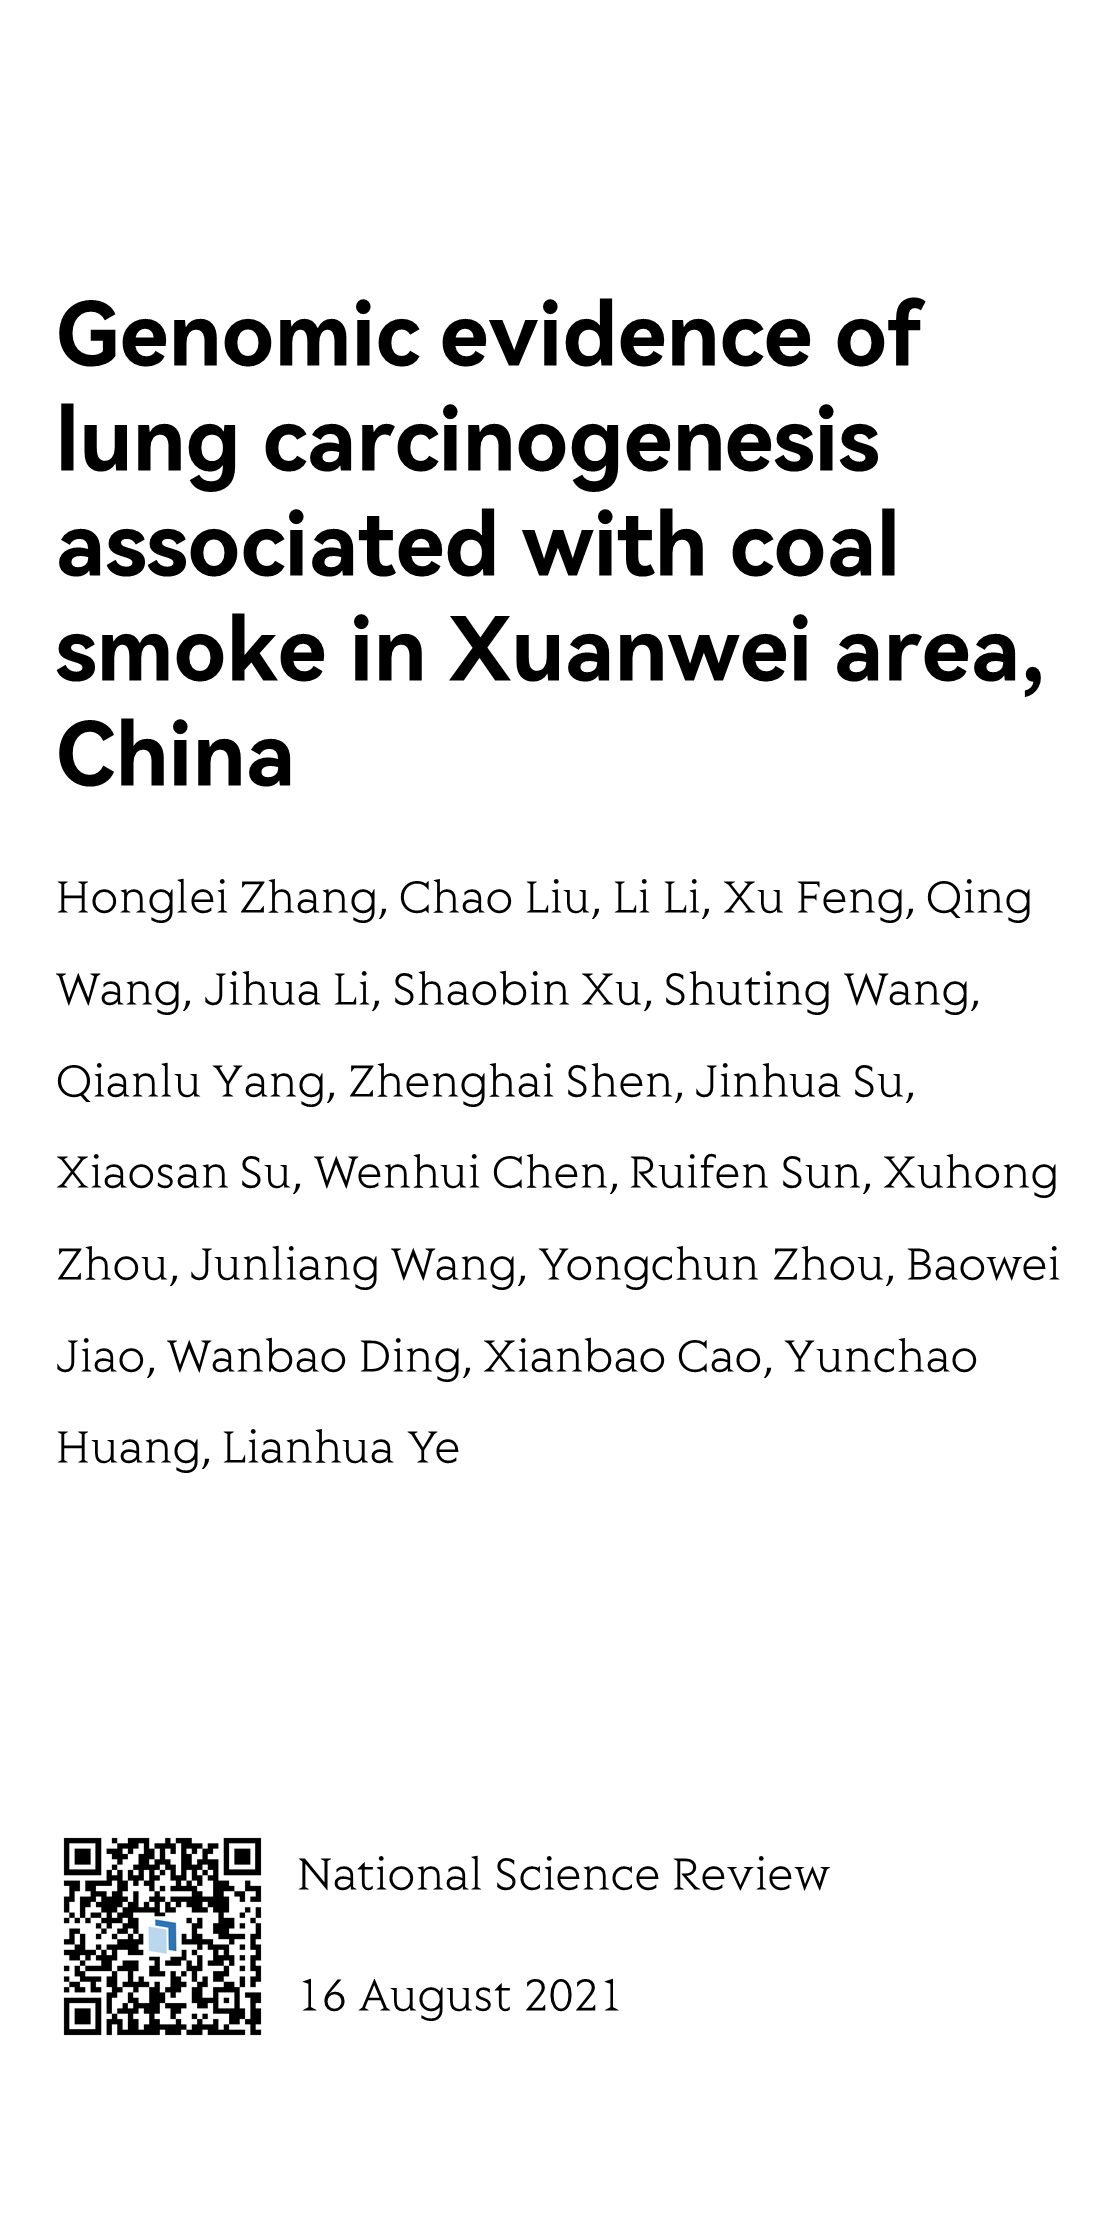 Genomic evidence of lung carcinogenesis associated with coal smoke in Xuanwei area, China_1